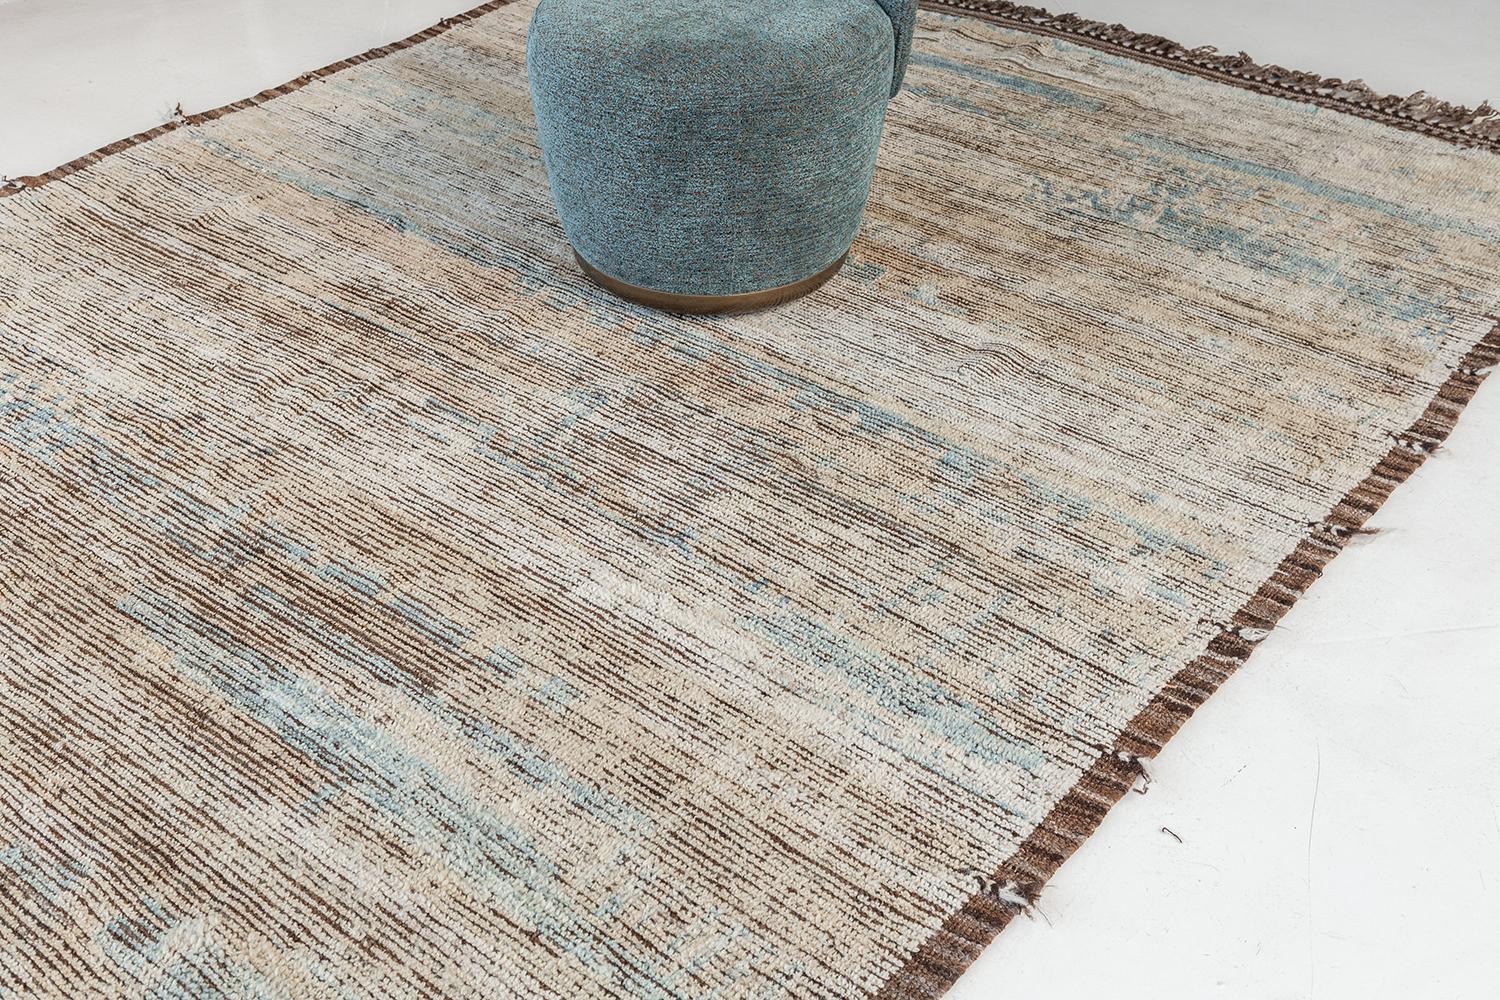 Malaren is a luxurious wool rug with timeless embossed detailing. In addition to its perfect natural flat weave, Malaren has earthy tone shags that brings a lustrous texture and contemporary feel to one's space. With its plush pile, functional